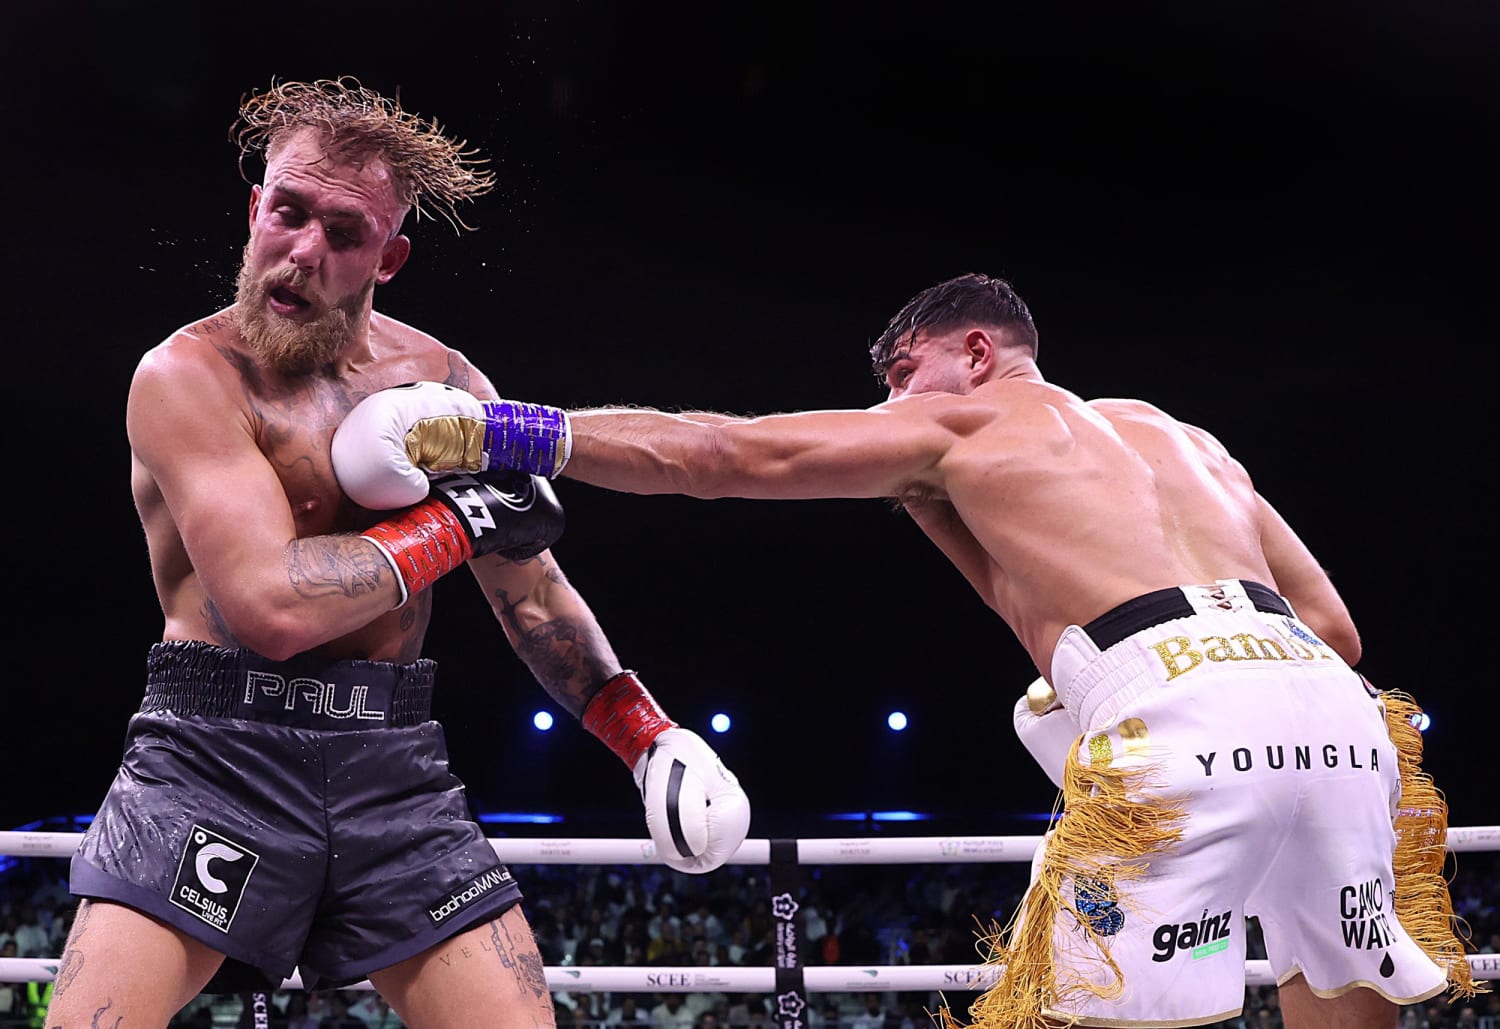 Jake Paul takes first ring defeat by split decision to Fury